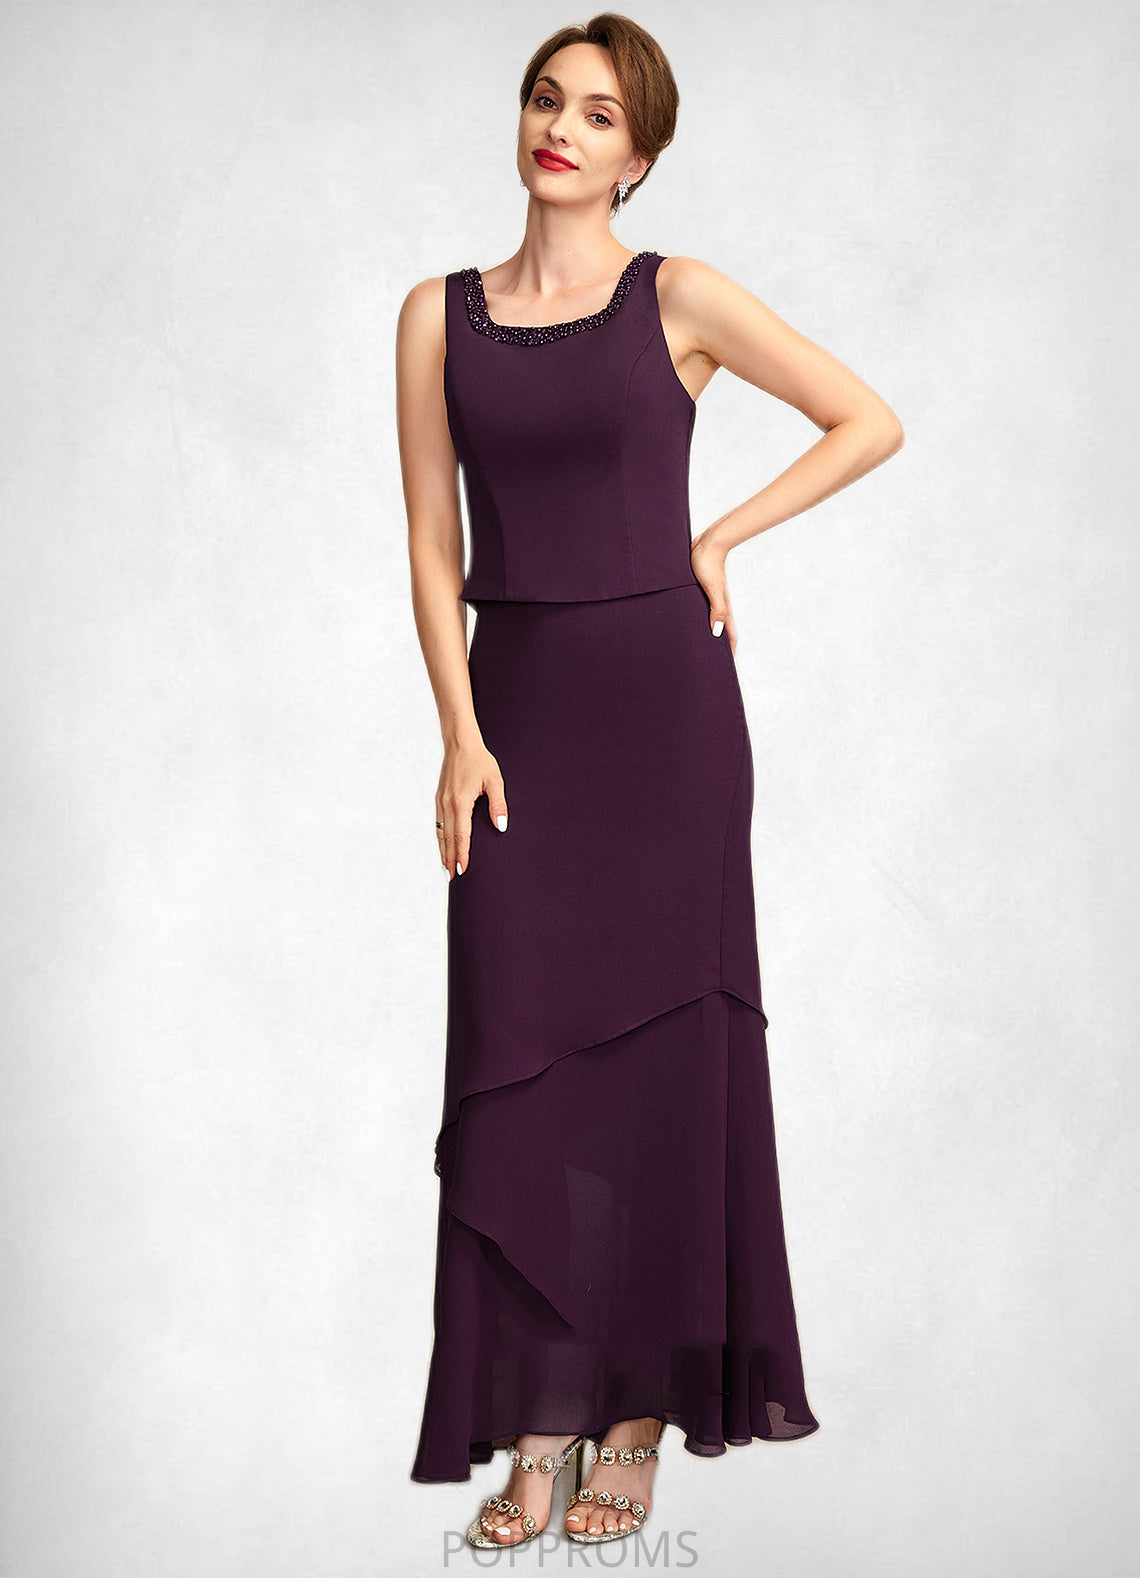 Giada Sheath/Column Scoop Neck Ankle-Length Chiffon Mother of the Bride Dress With Beading Sequins PP6126P0015024